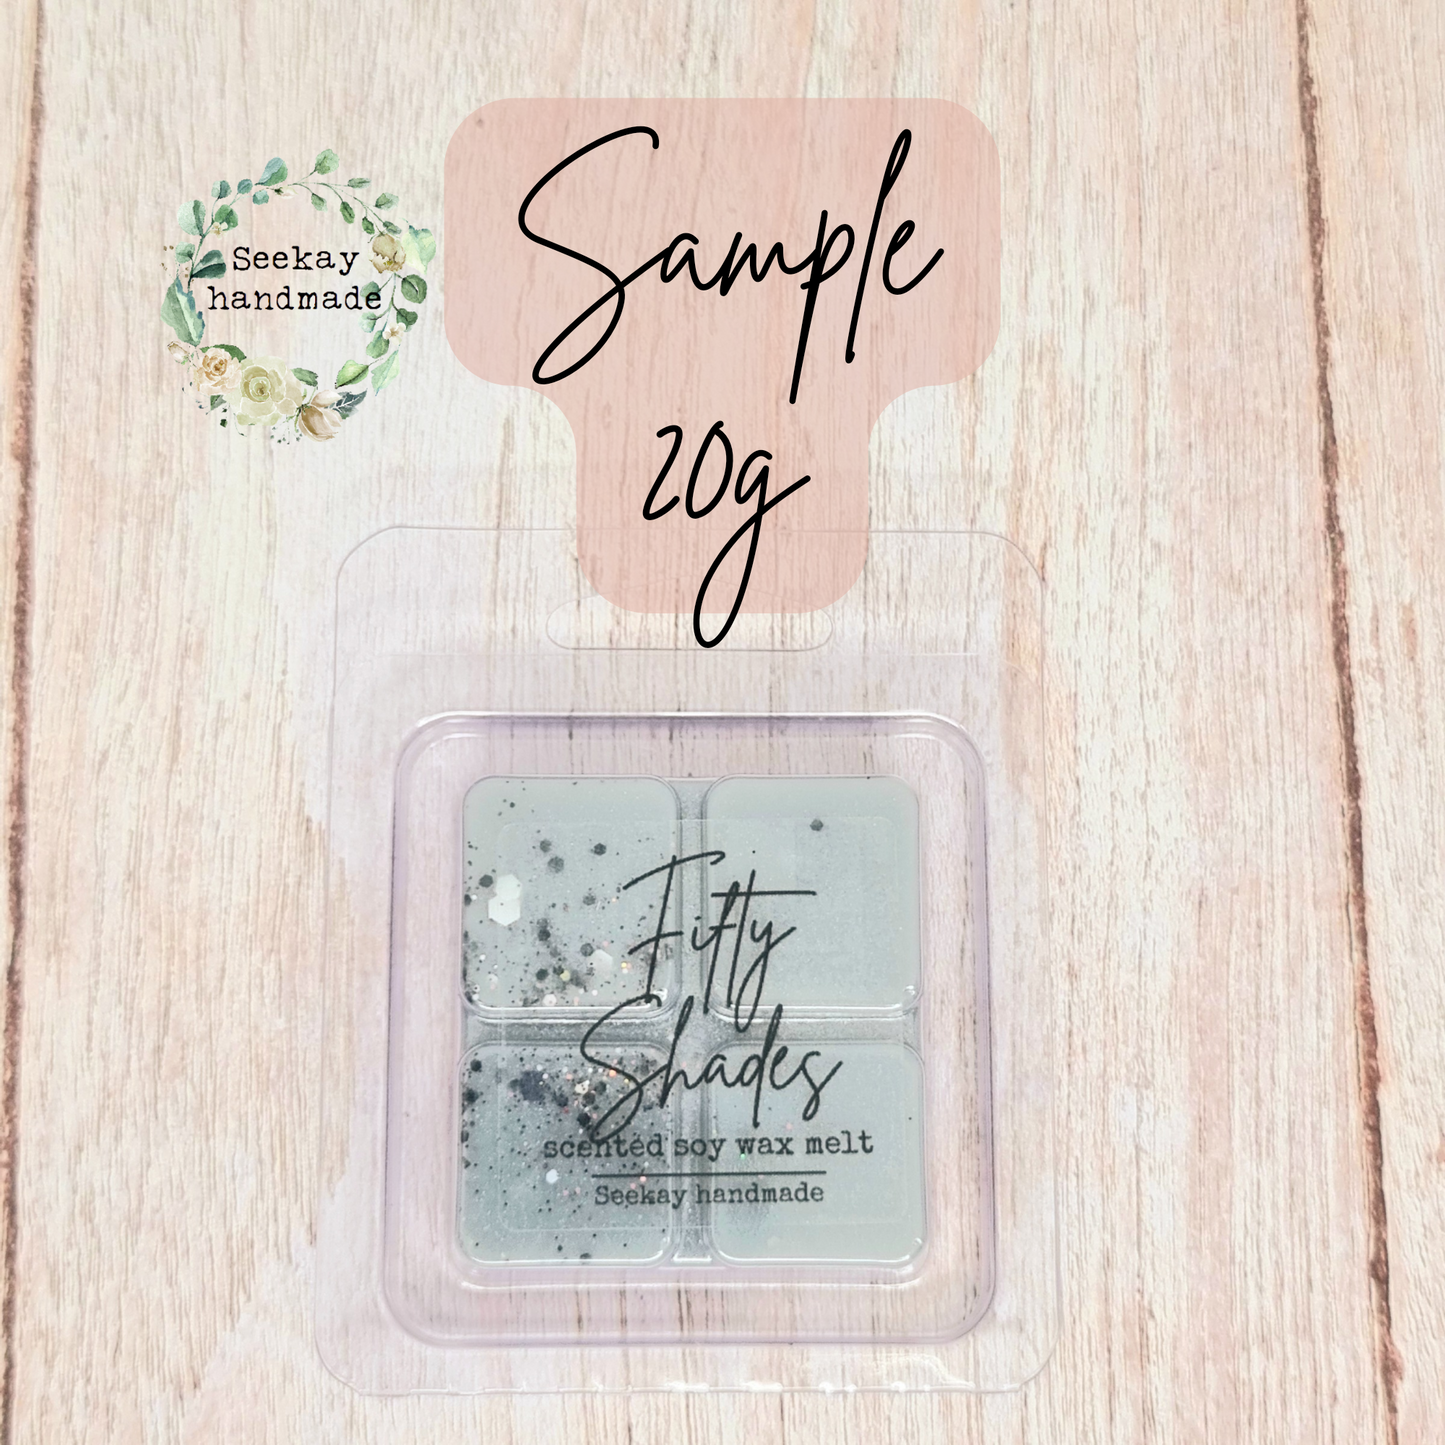 Fifty Shades scented soy wax melt